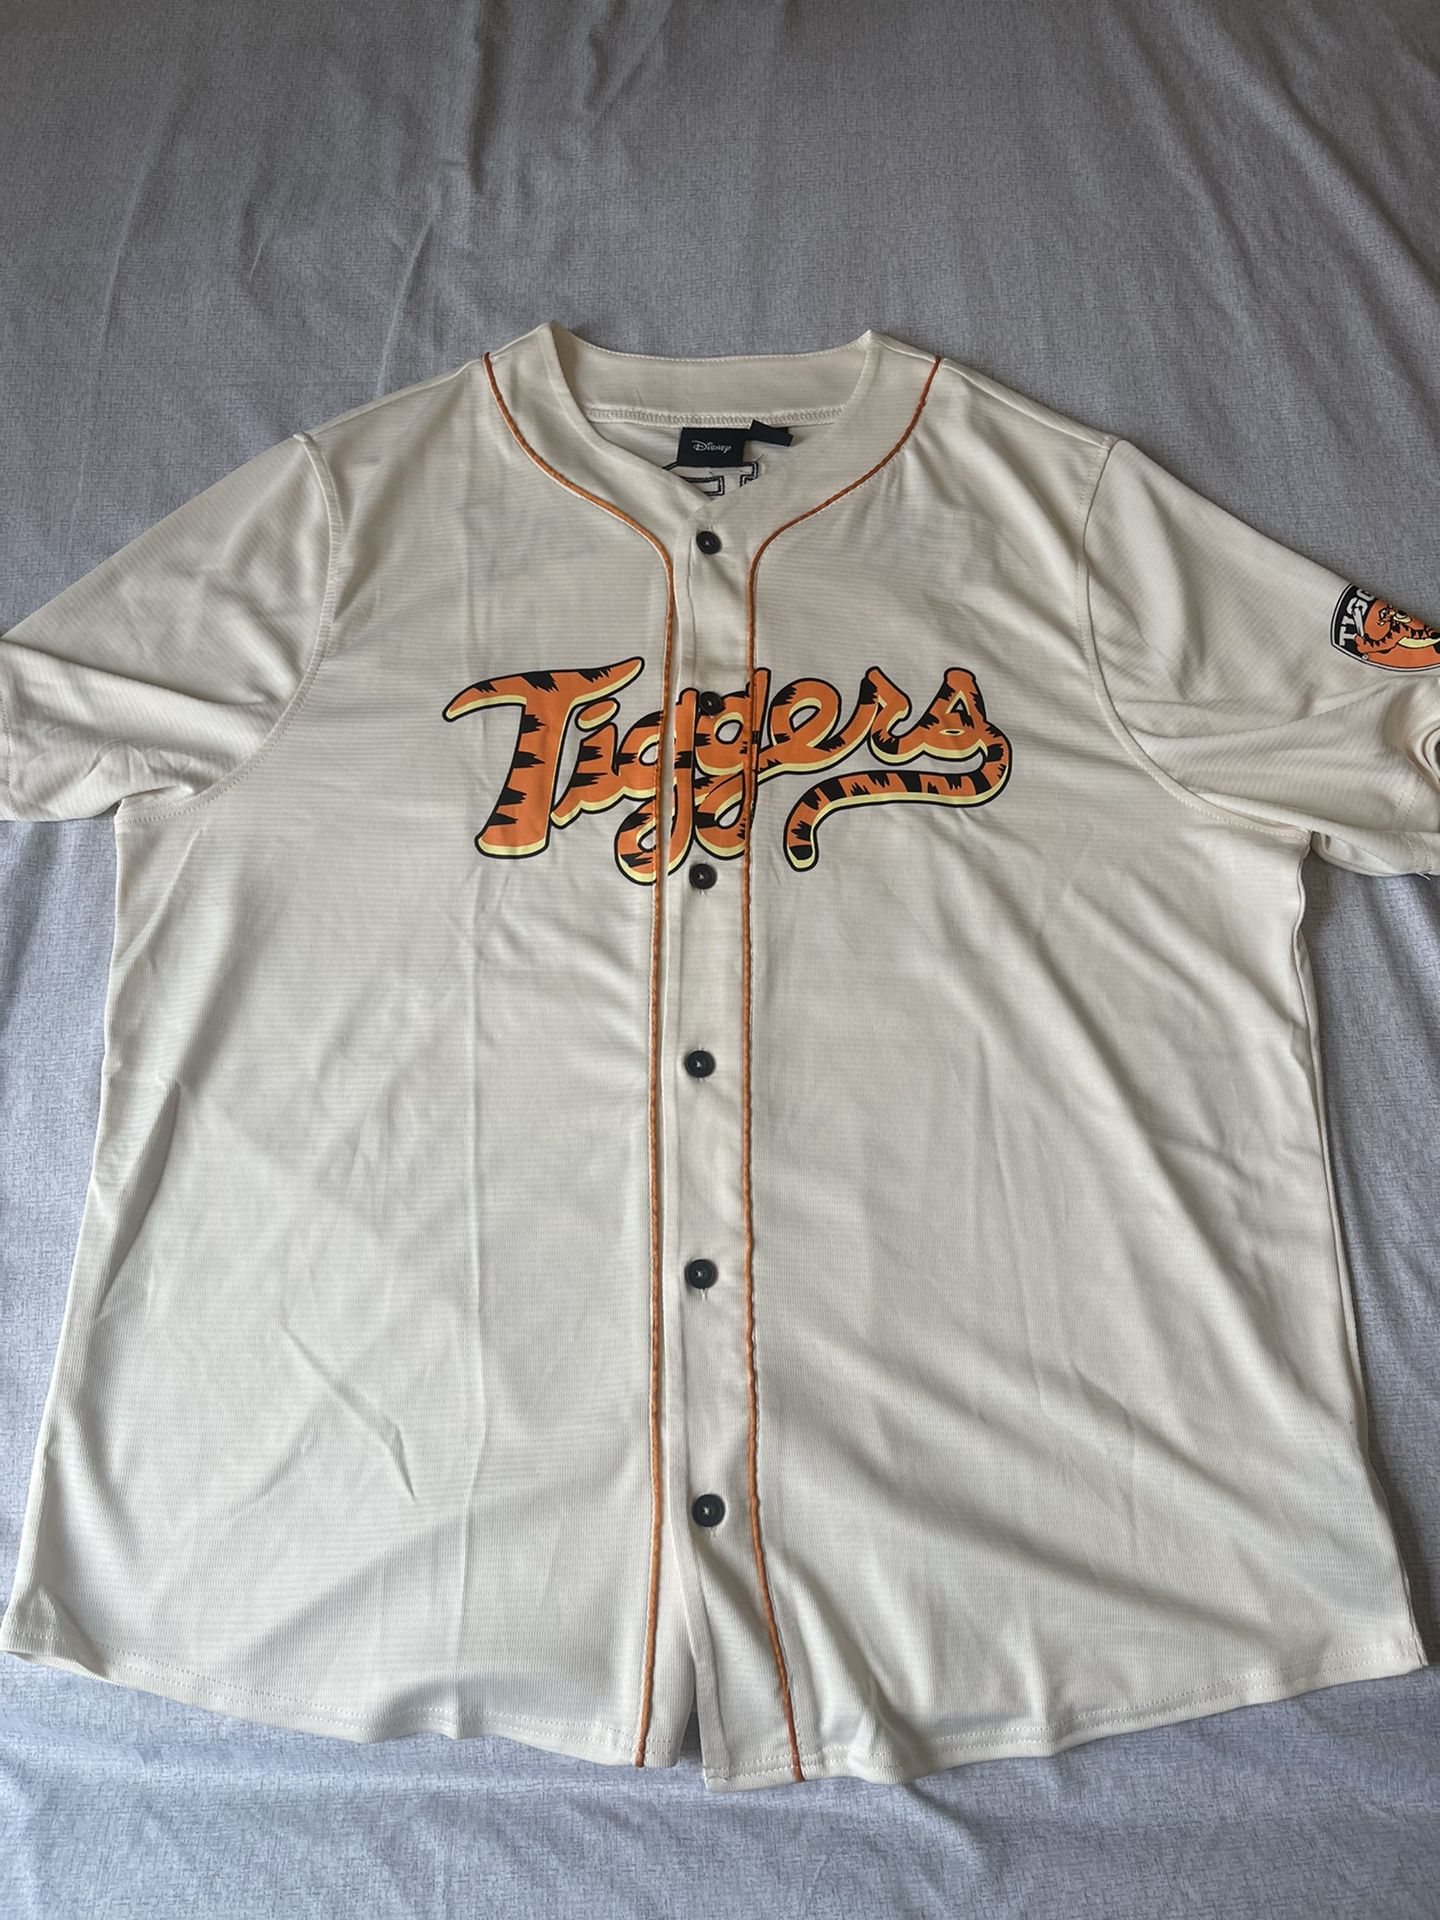 2xL Tony Gwynn Cooperstown Jersey for Sale in San Diego, CA - OfferUp